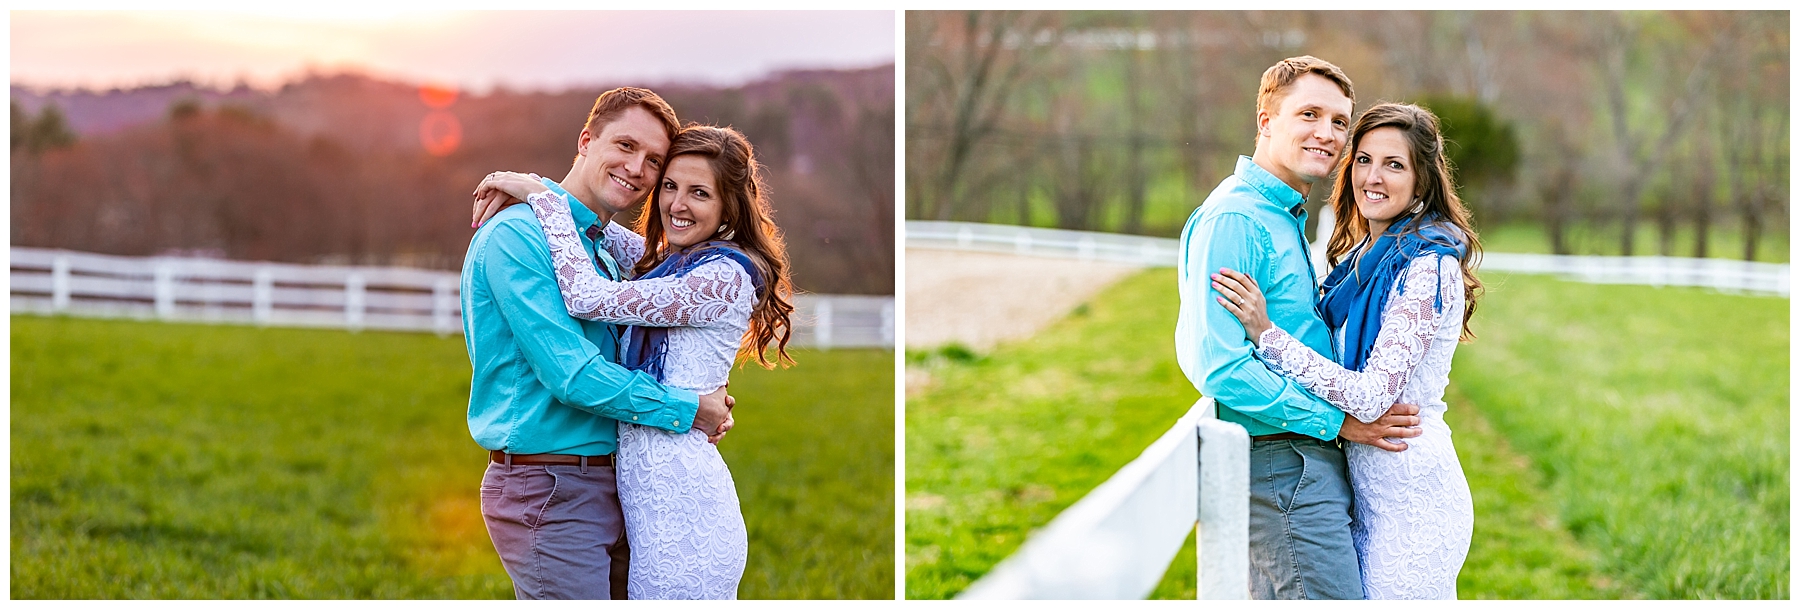 Chelsea Phil Private Estate Engagement Living Radiant Photography photos color_0047.jpg